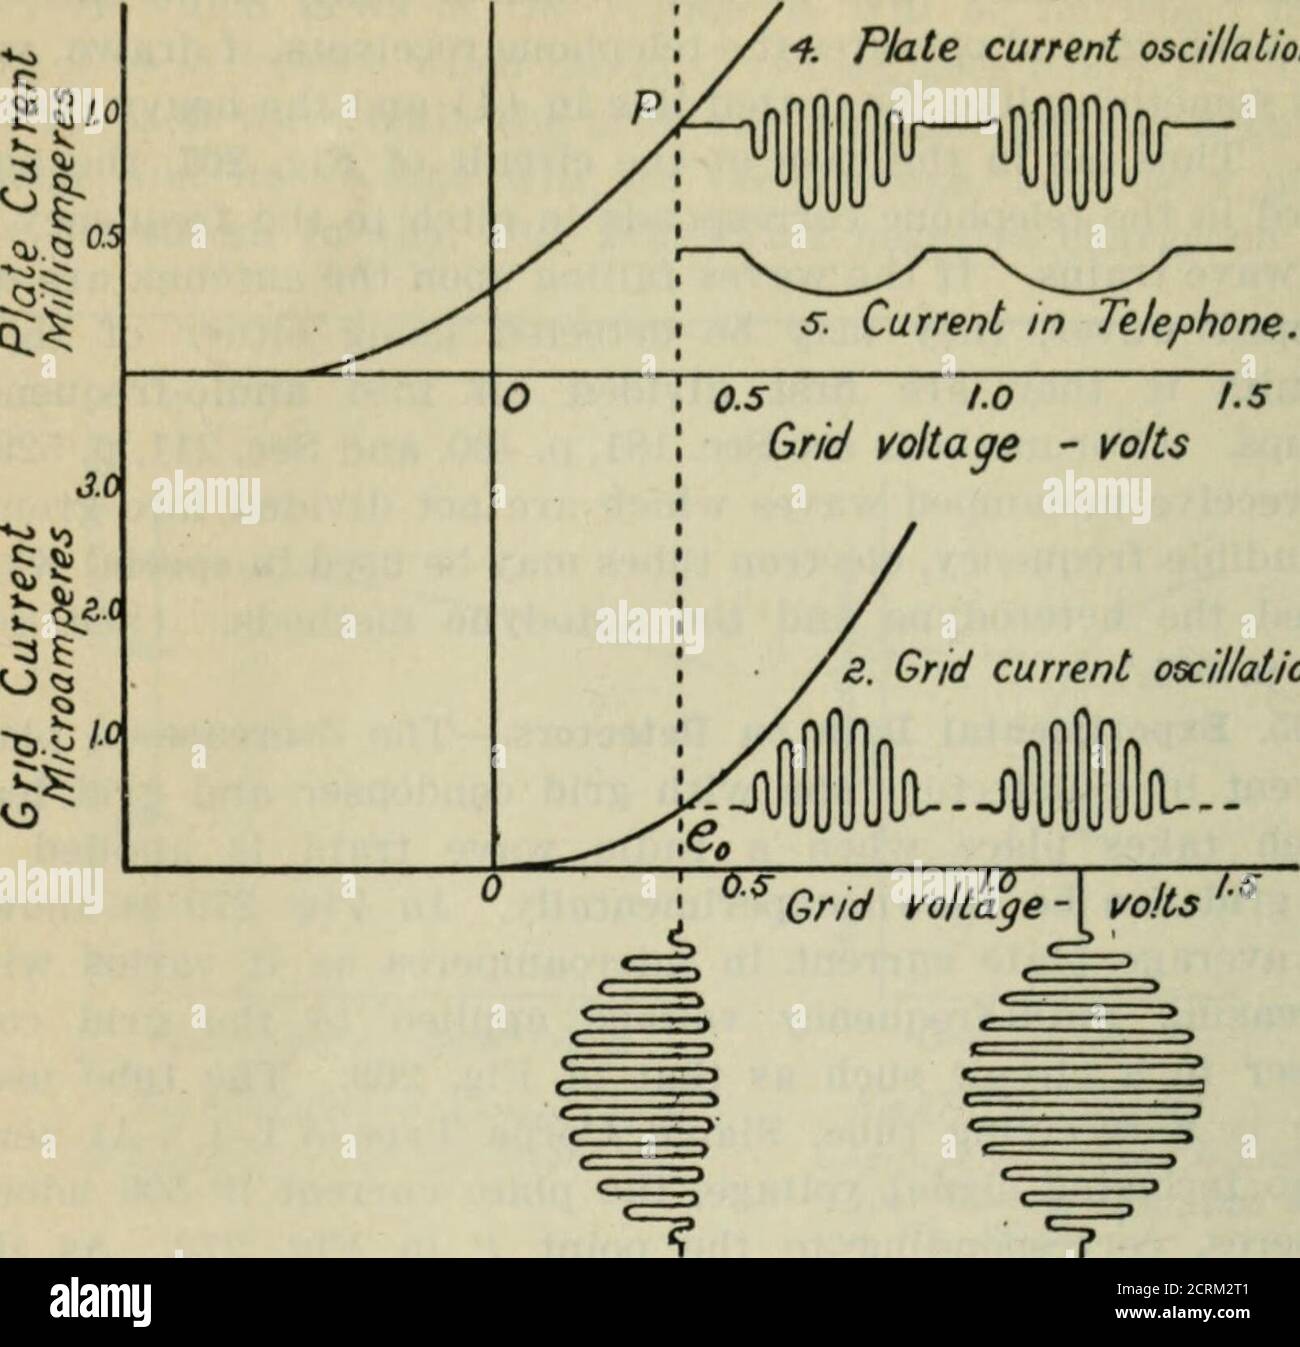 . The principles underlying radio communication . in Fig. 272. As theamplitude of the oscillations in grid voltage is increased to 0.5volts, the plate current decreases to 480 microamperes, then to420 microamperes at 1.0 volt, etc. This curve was taken with acondenser (O in Fig. 269) of 250 micromicrofarads and a leakresistance of 2 megohms. The operating point, or steady gridvoltage, about which the potential of the grid was caused to os-cillate by the incoming signal, was +0.8 volts, corresponding tothe point e0 in Fig. 272. The tubes generally supplied to the Signal Corps for receiving(type Stock Photo